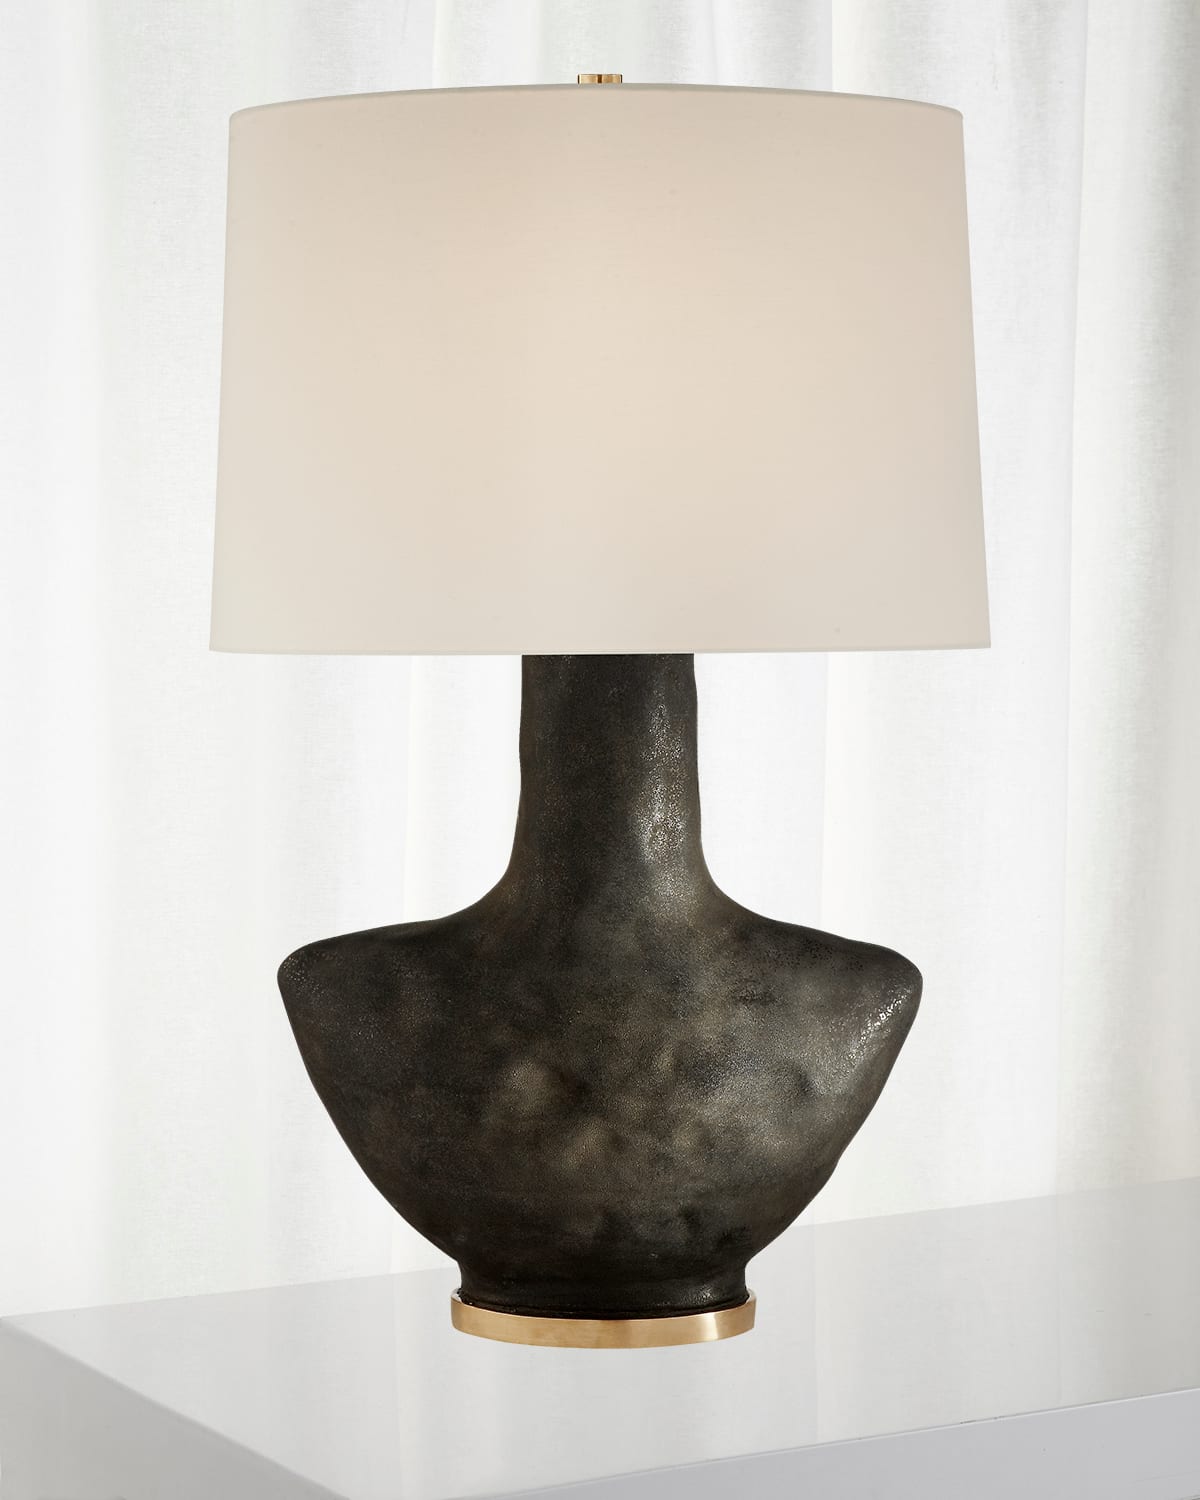 Armato Small Table Lamp By Kelly Wearstler | Horchow